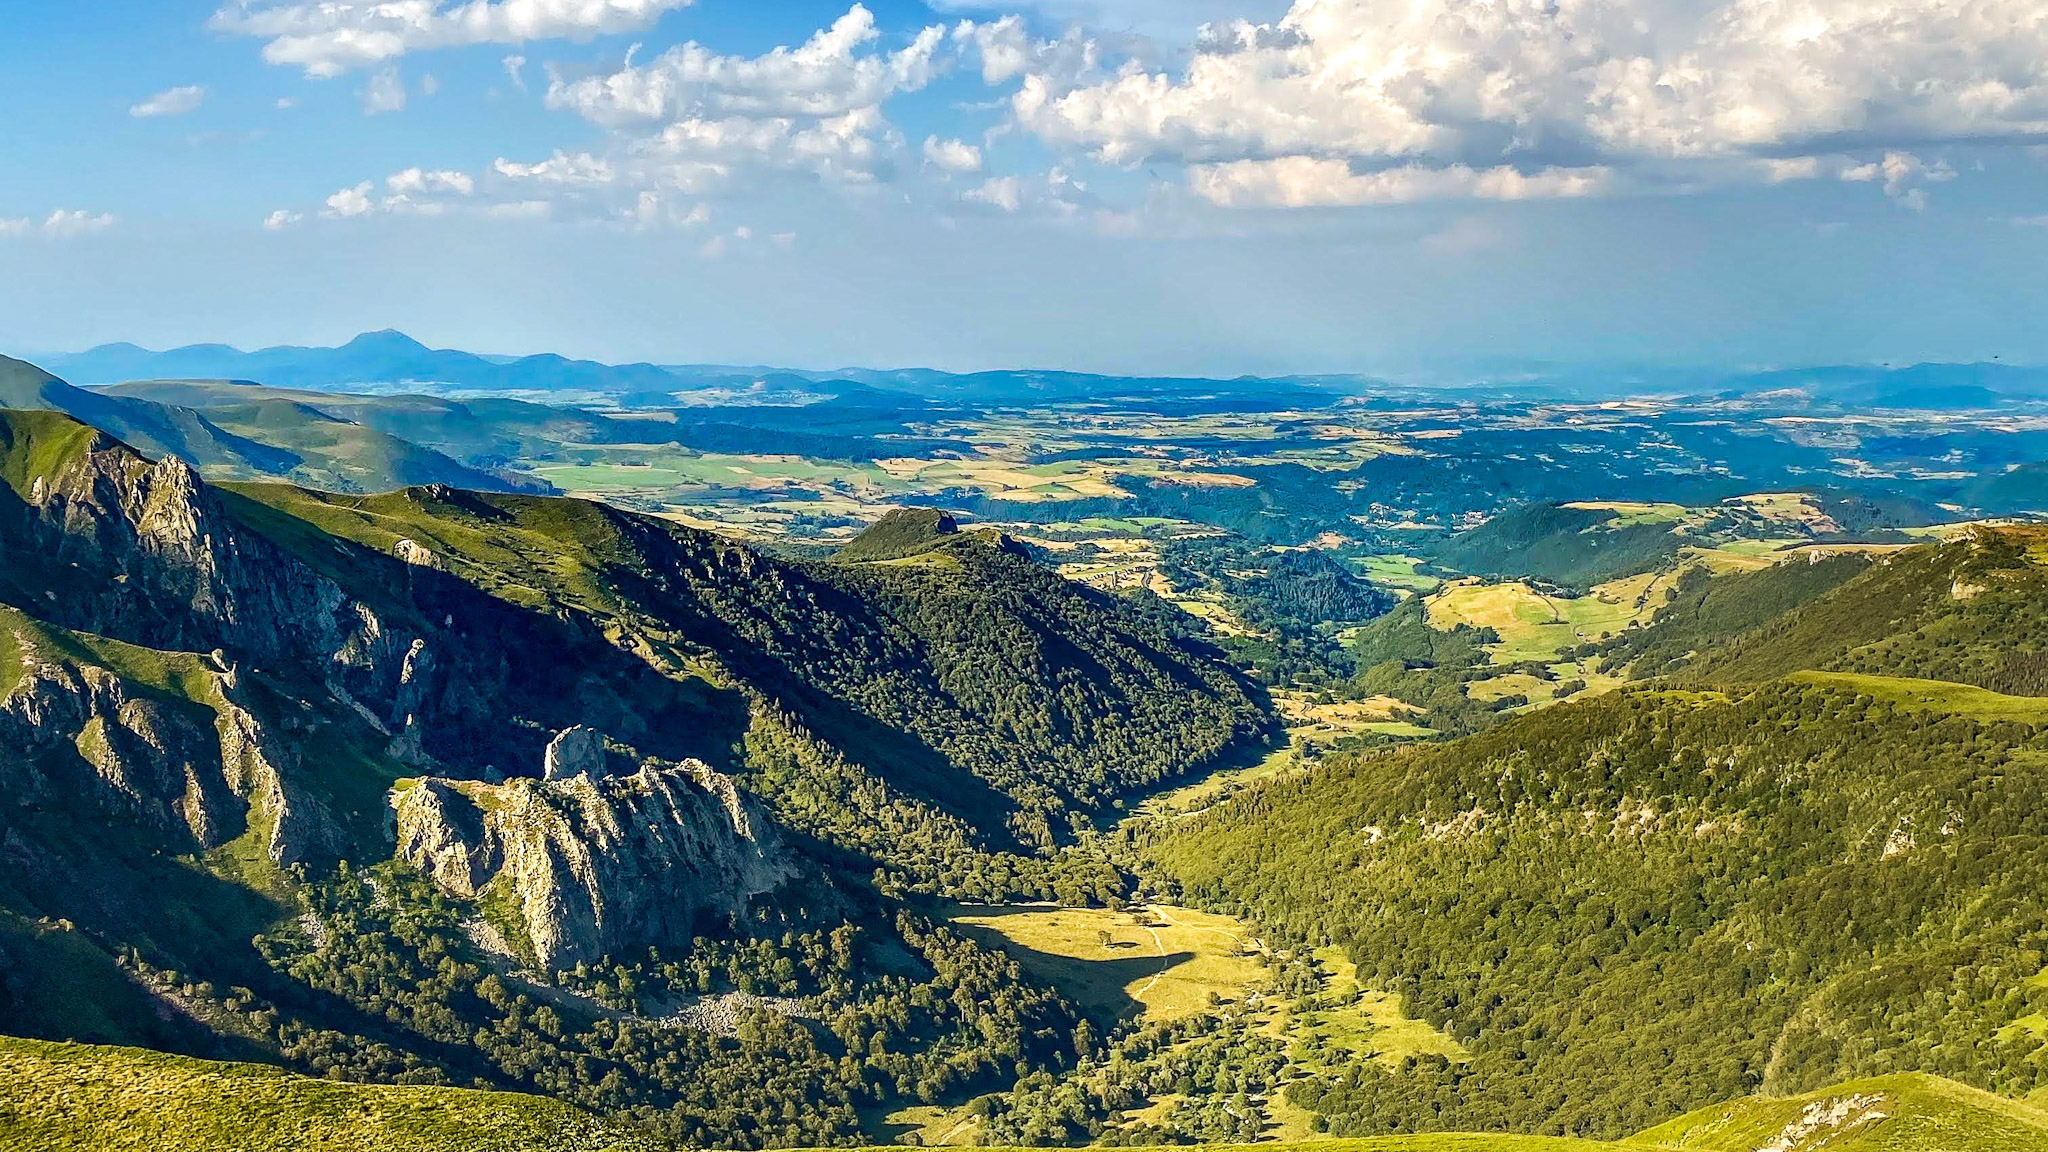 Super Besse, beautiful view of the Chaudefour Valley, and the Puy des Crebasses